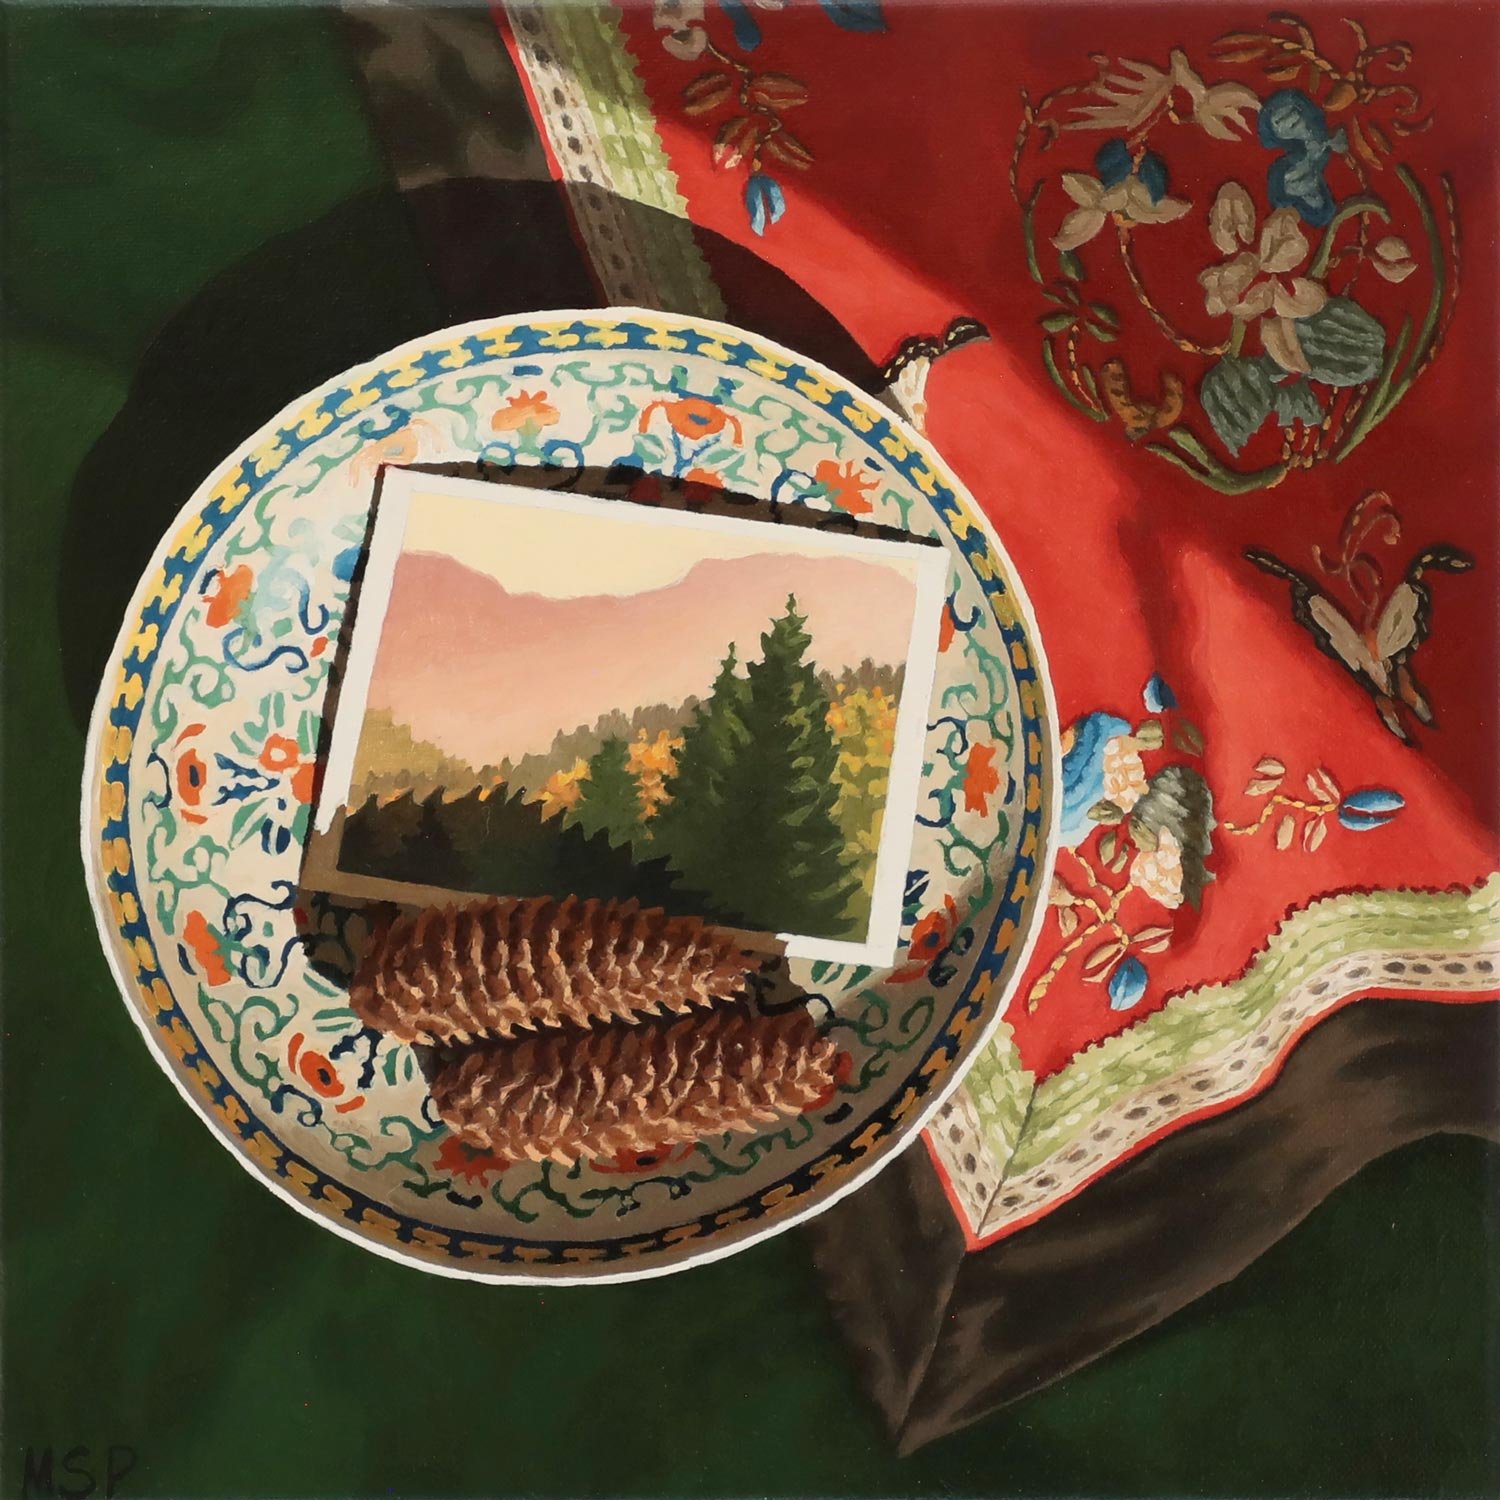 Embroidery and forest